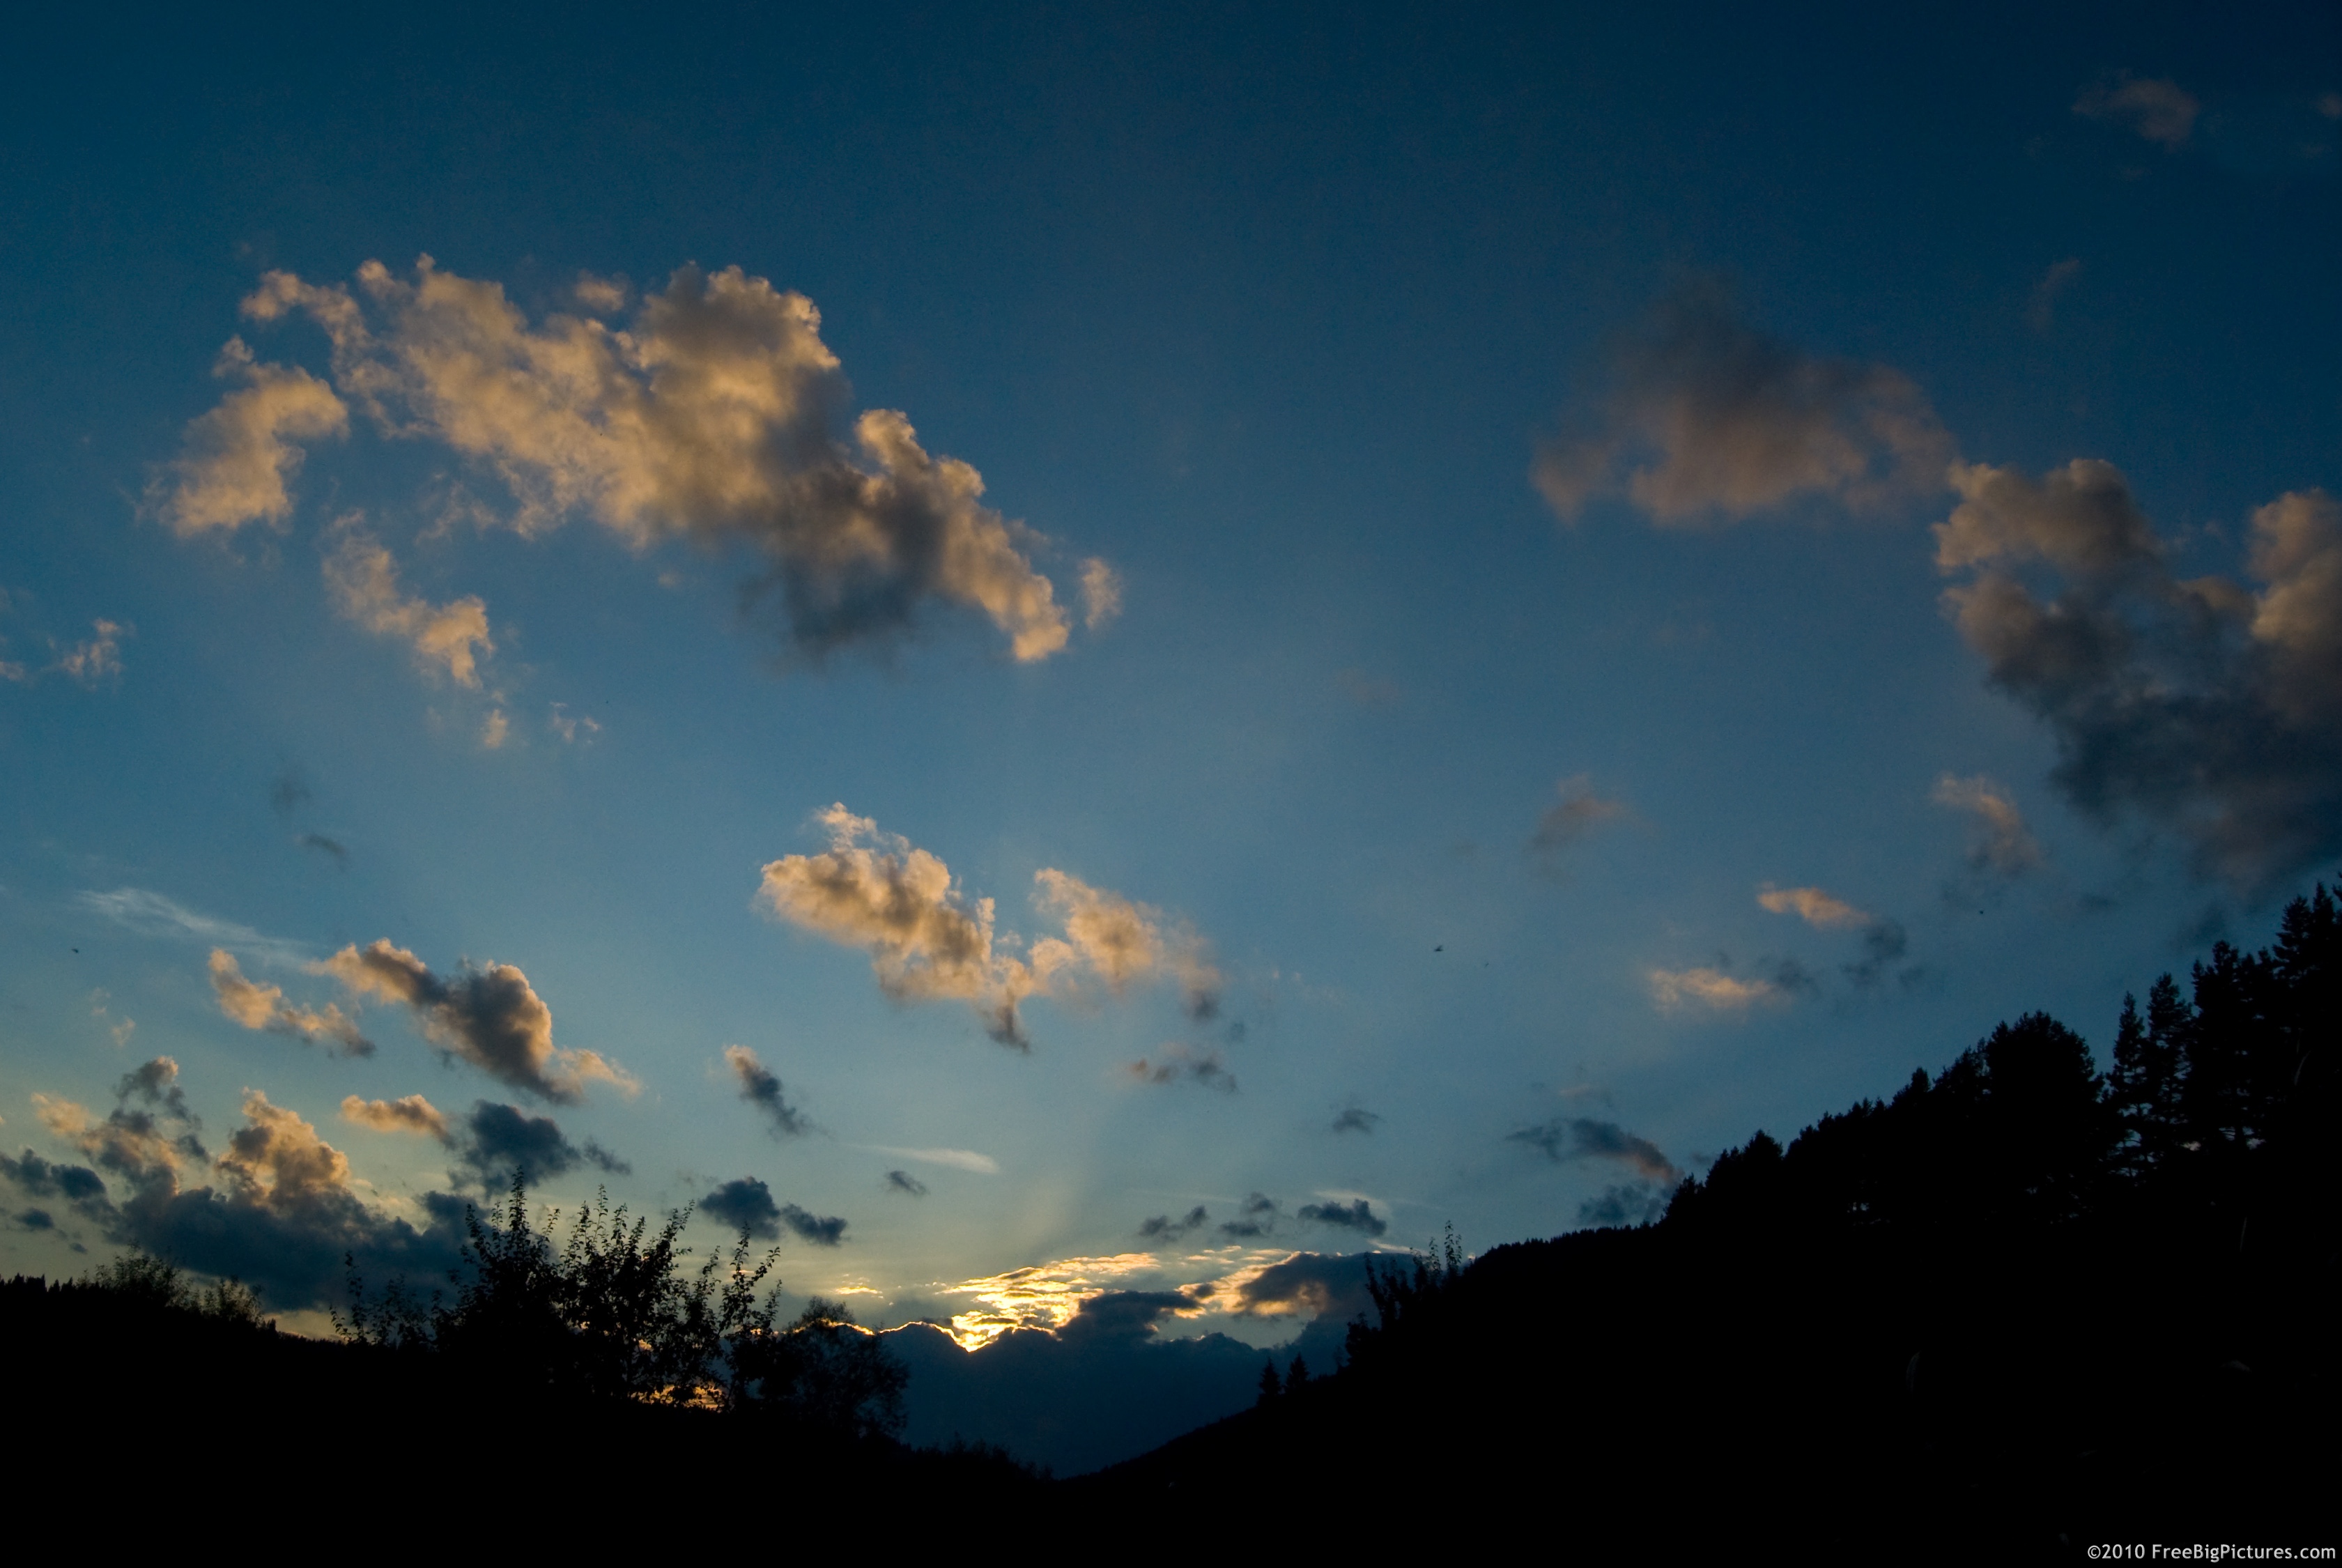 Fragments of clouds with golden hues on a blue sky at twilight